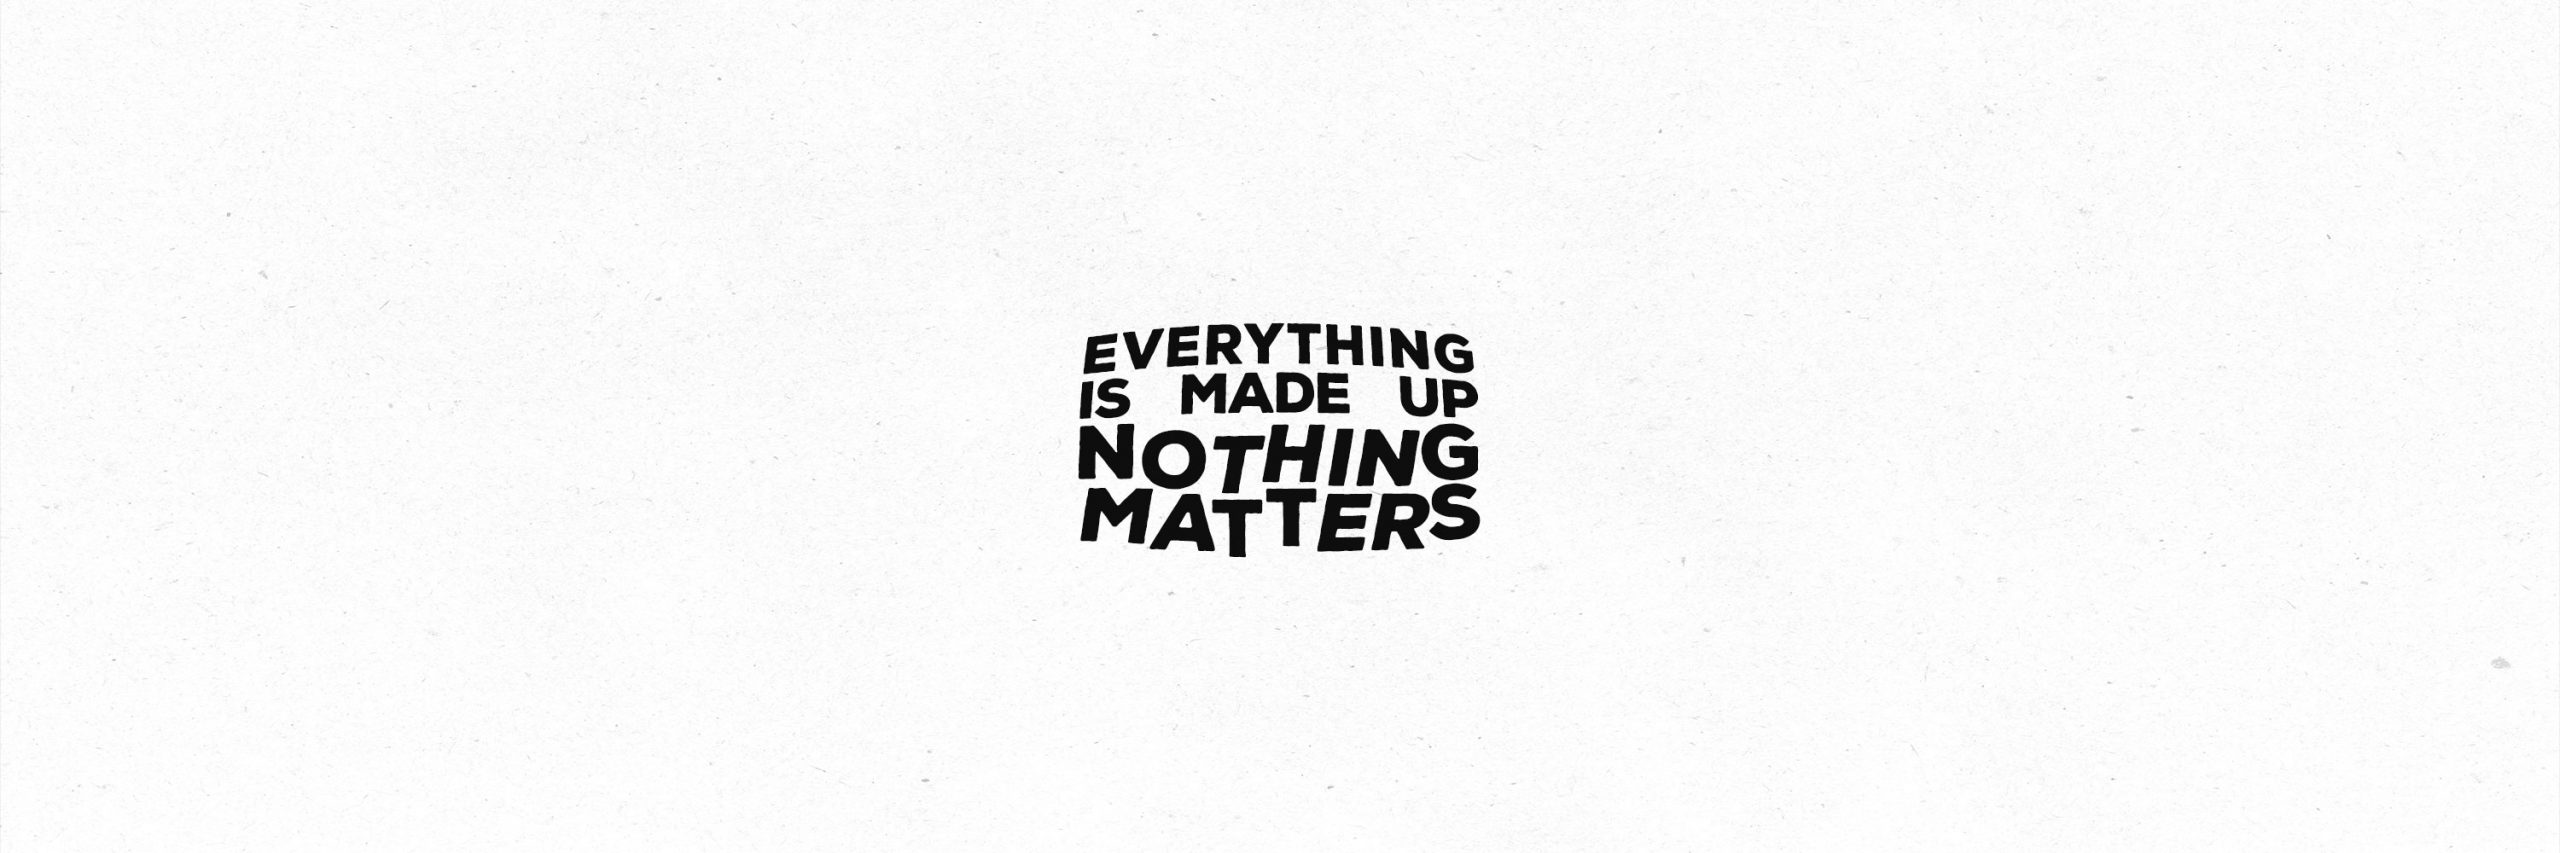 Everything is made up, nothing matters